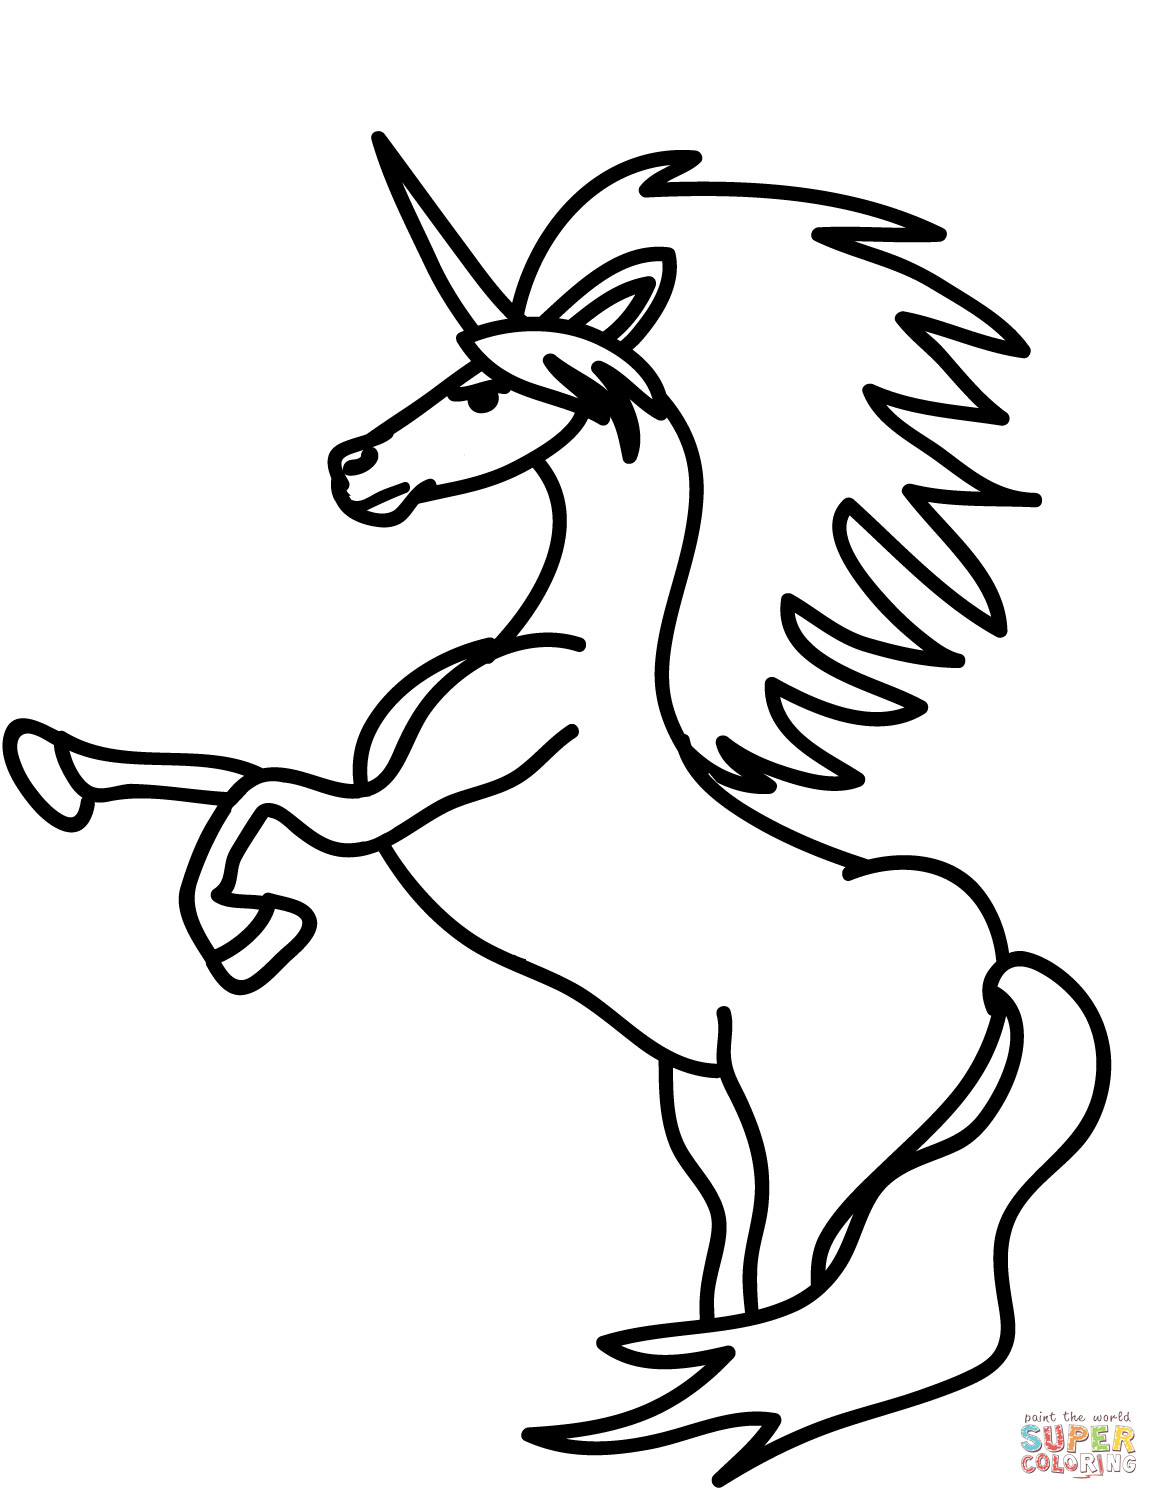 Printable Unicorn Coloring Pages Boys
 Rearing Unicorn coloring page